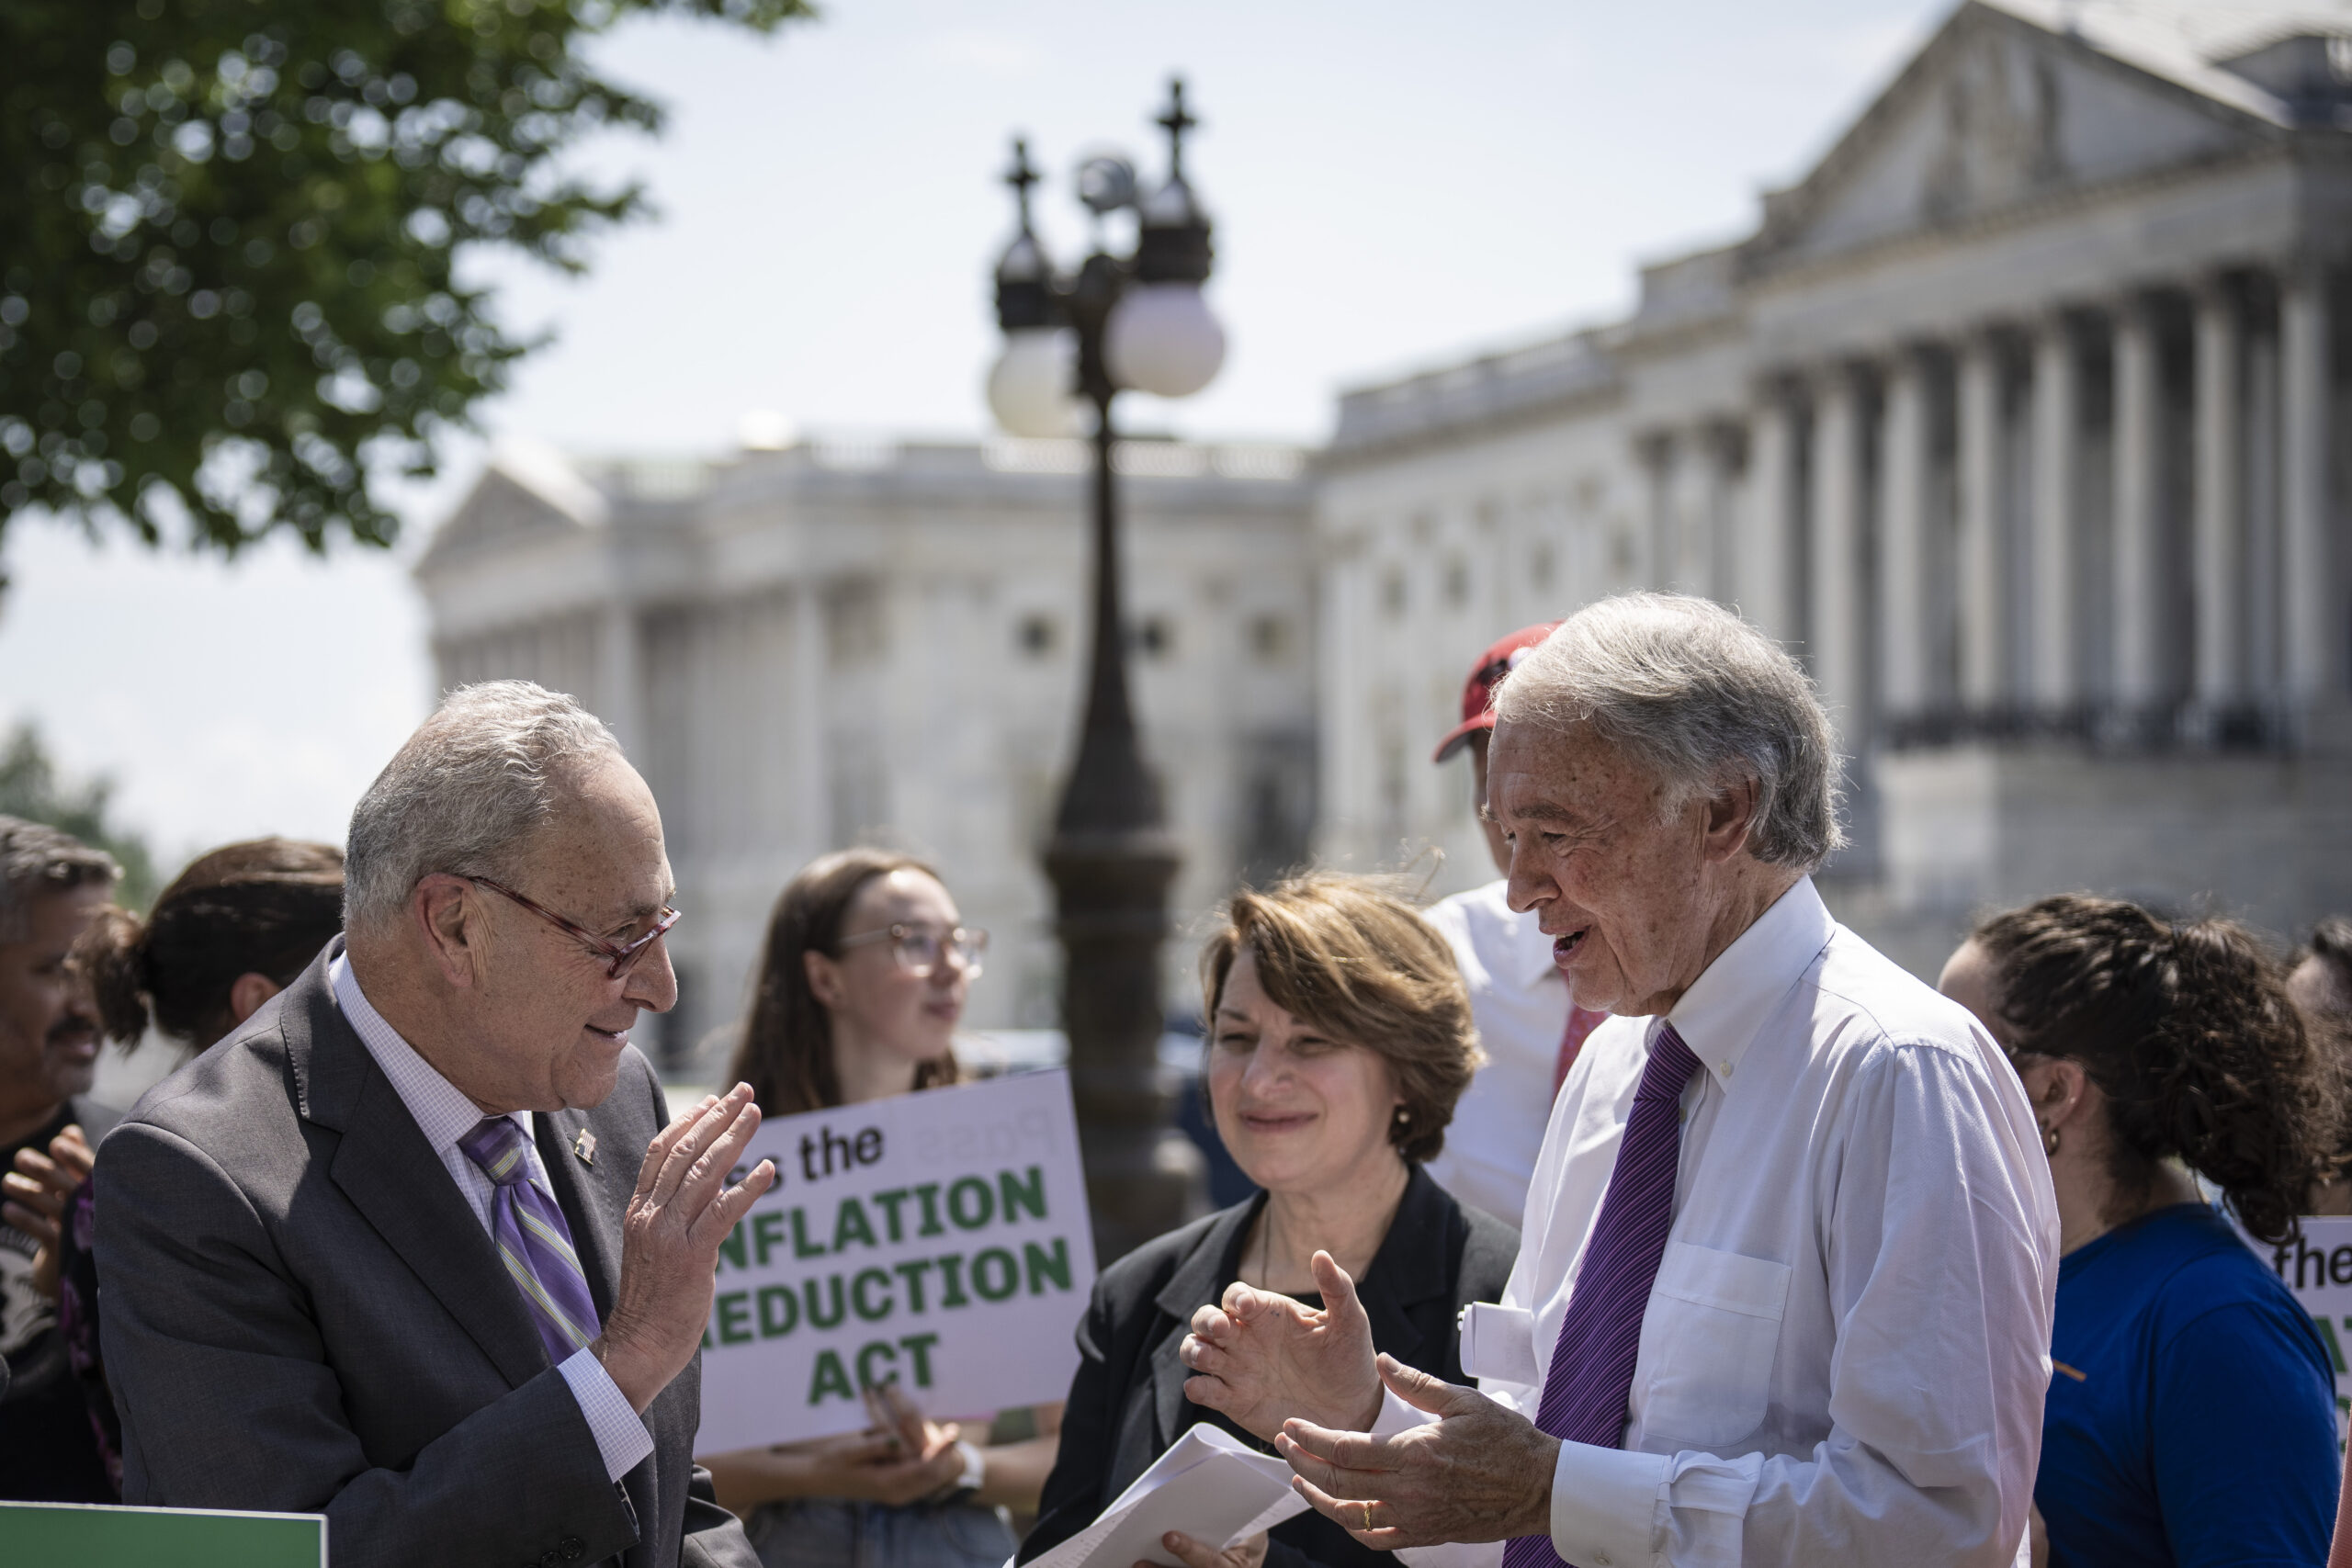 Democratic senators discussing climate provisions in the inflation reduction act